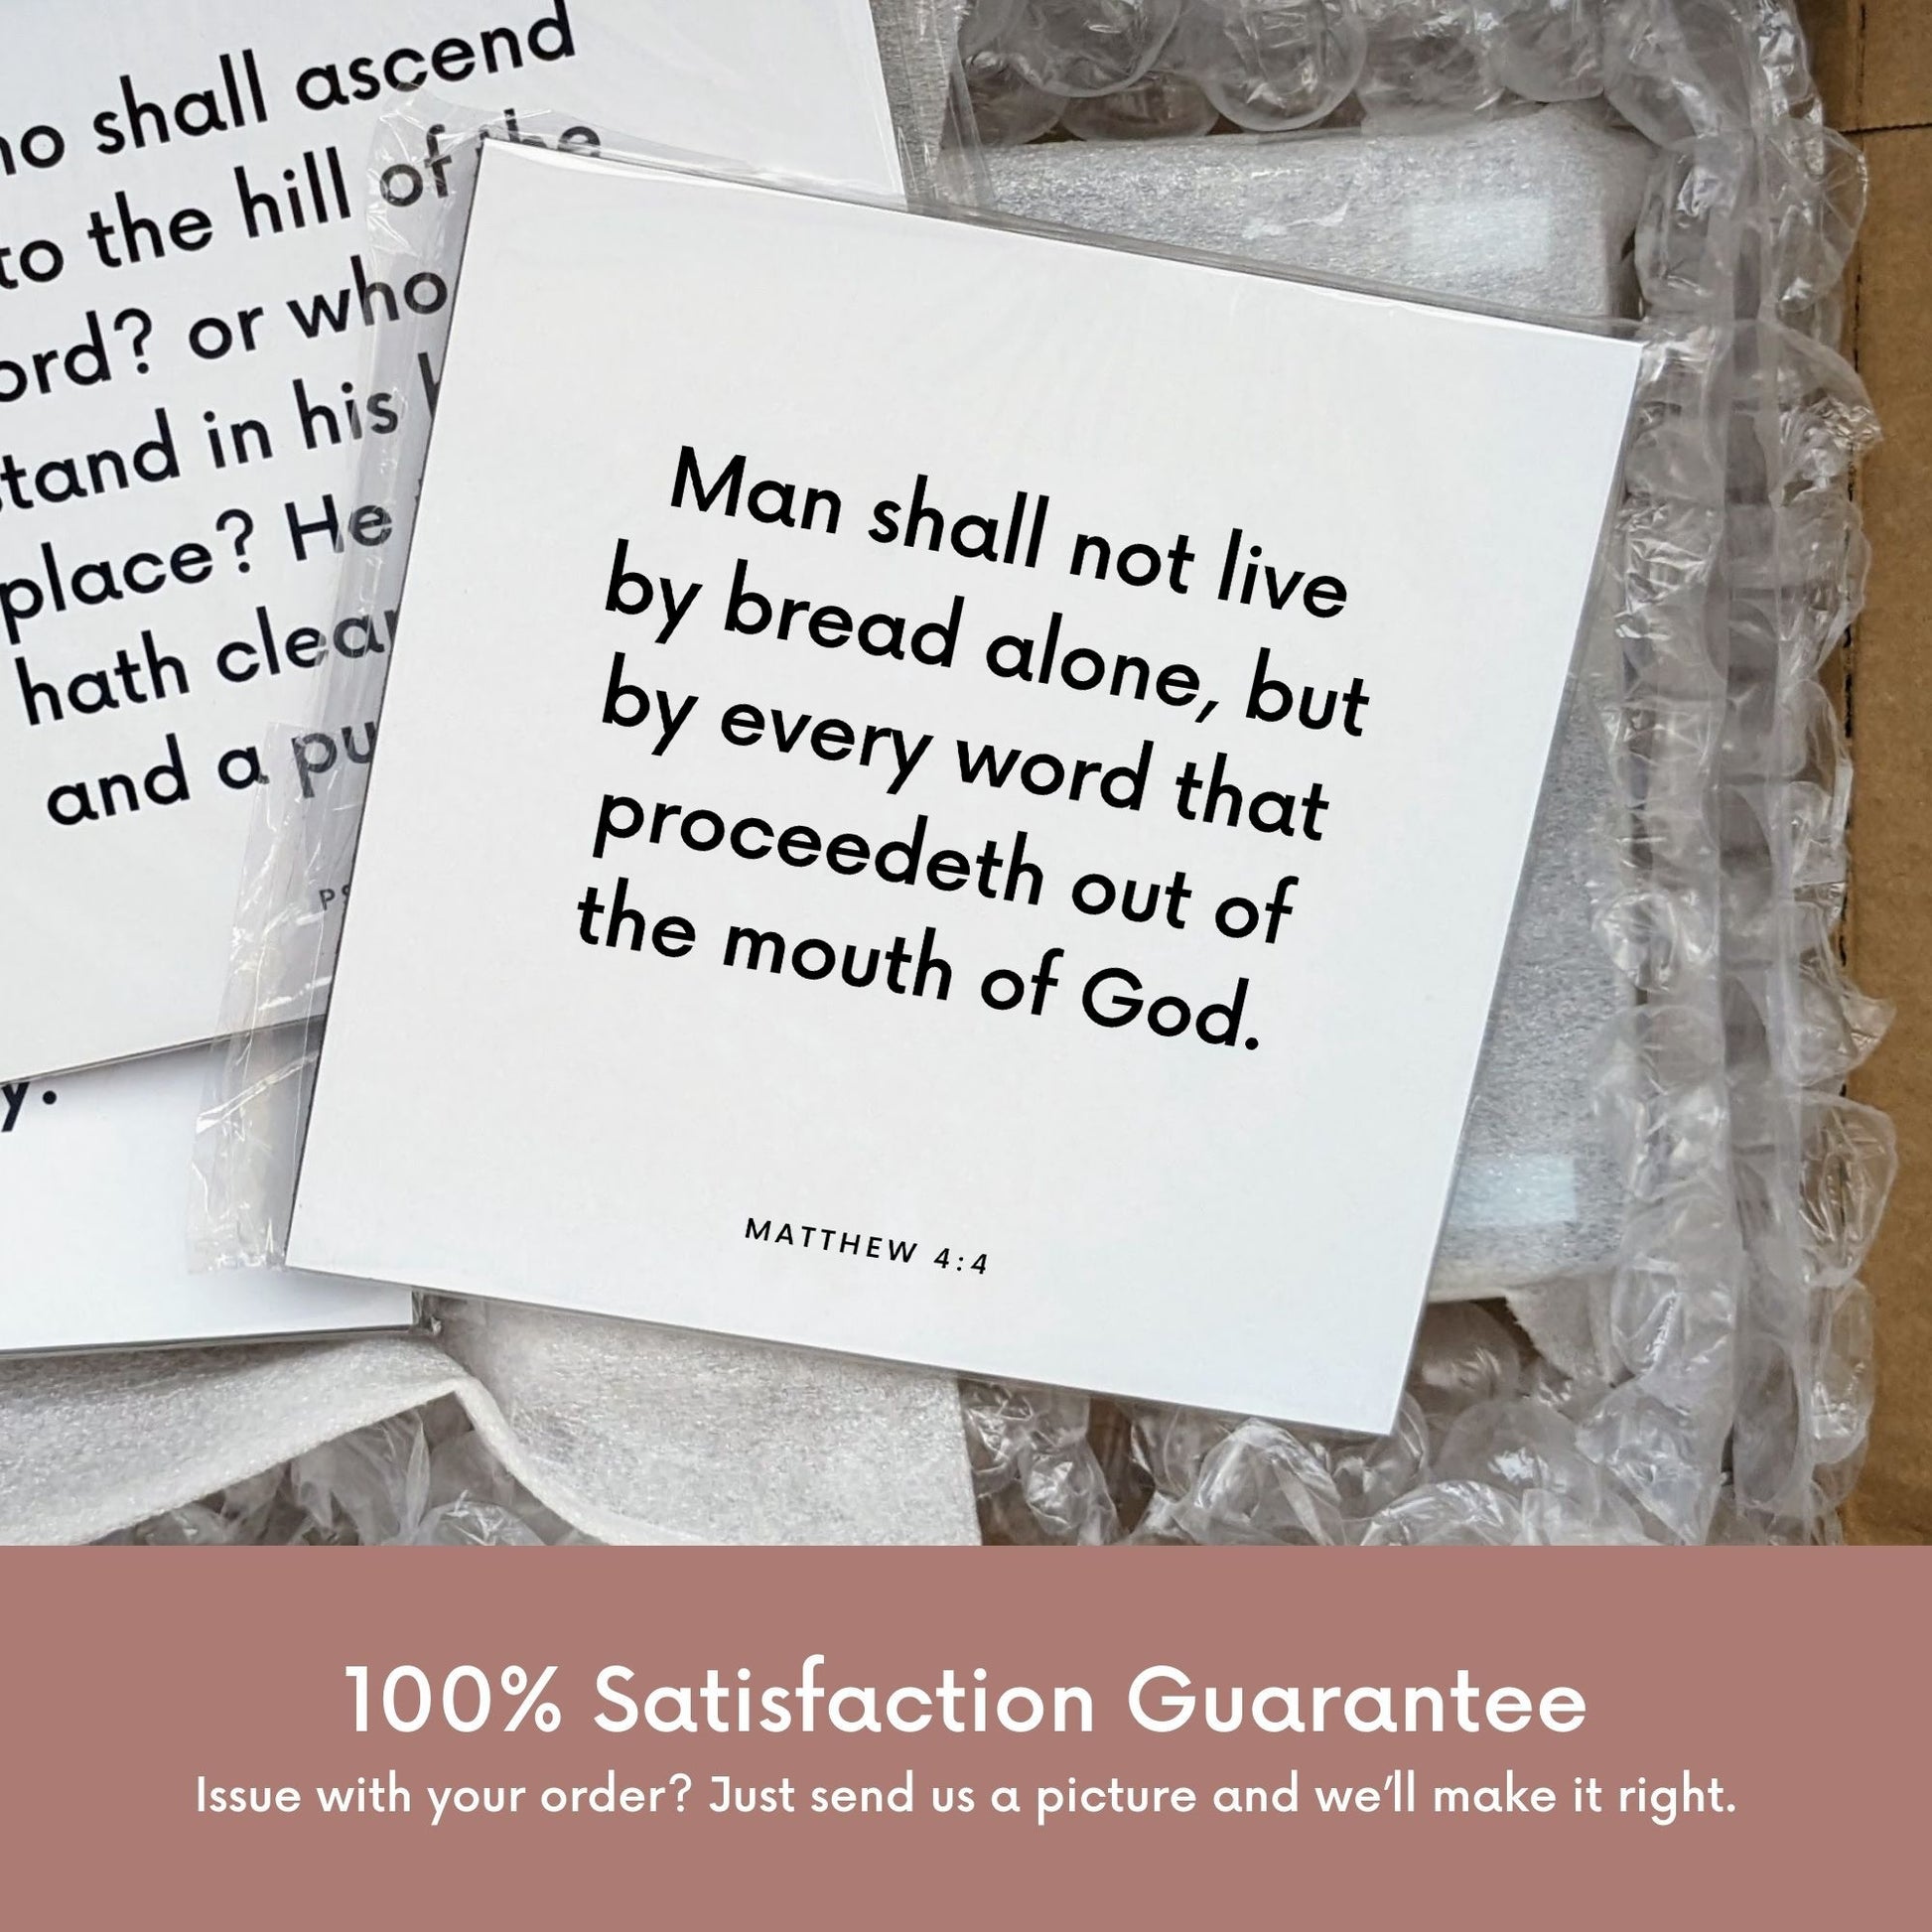 Shipping materials for scripture tile of Matthew 4:4 - "Man shall not live by bread alone, but by every word"